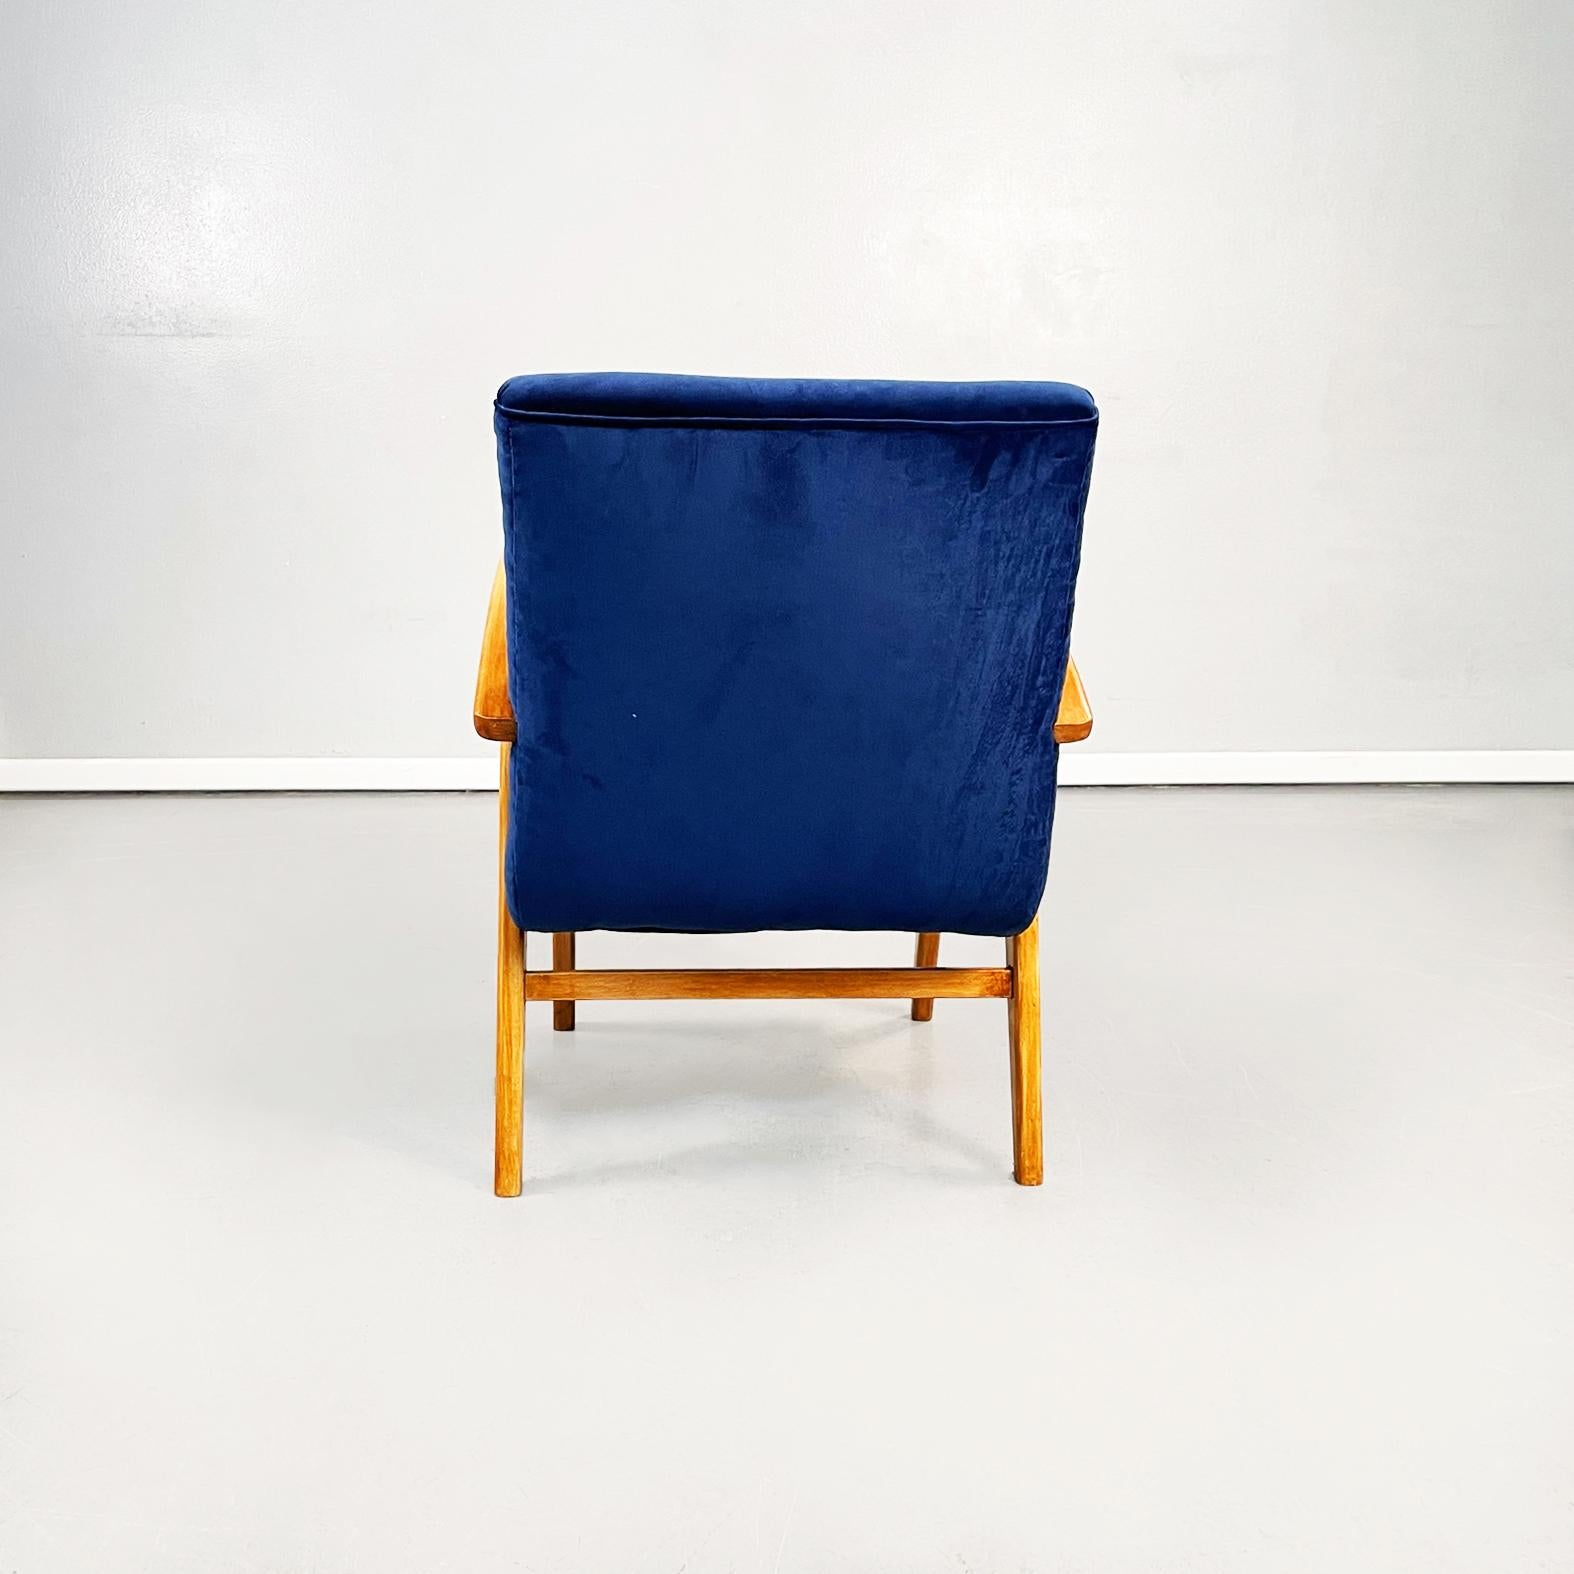 Mid-20th Century Danish Mid-Century Modern Armchair in Blue Velvet and Solid Wood, 1960s